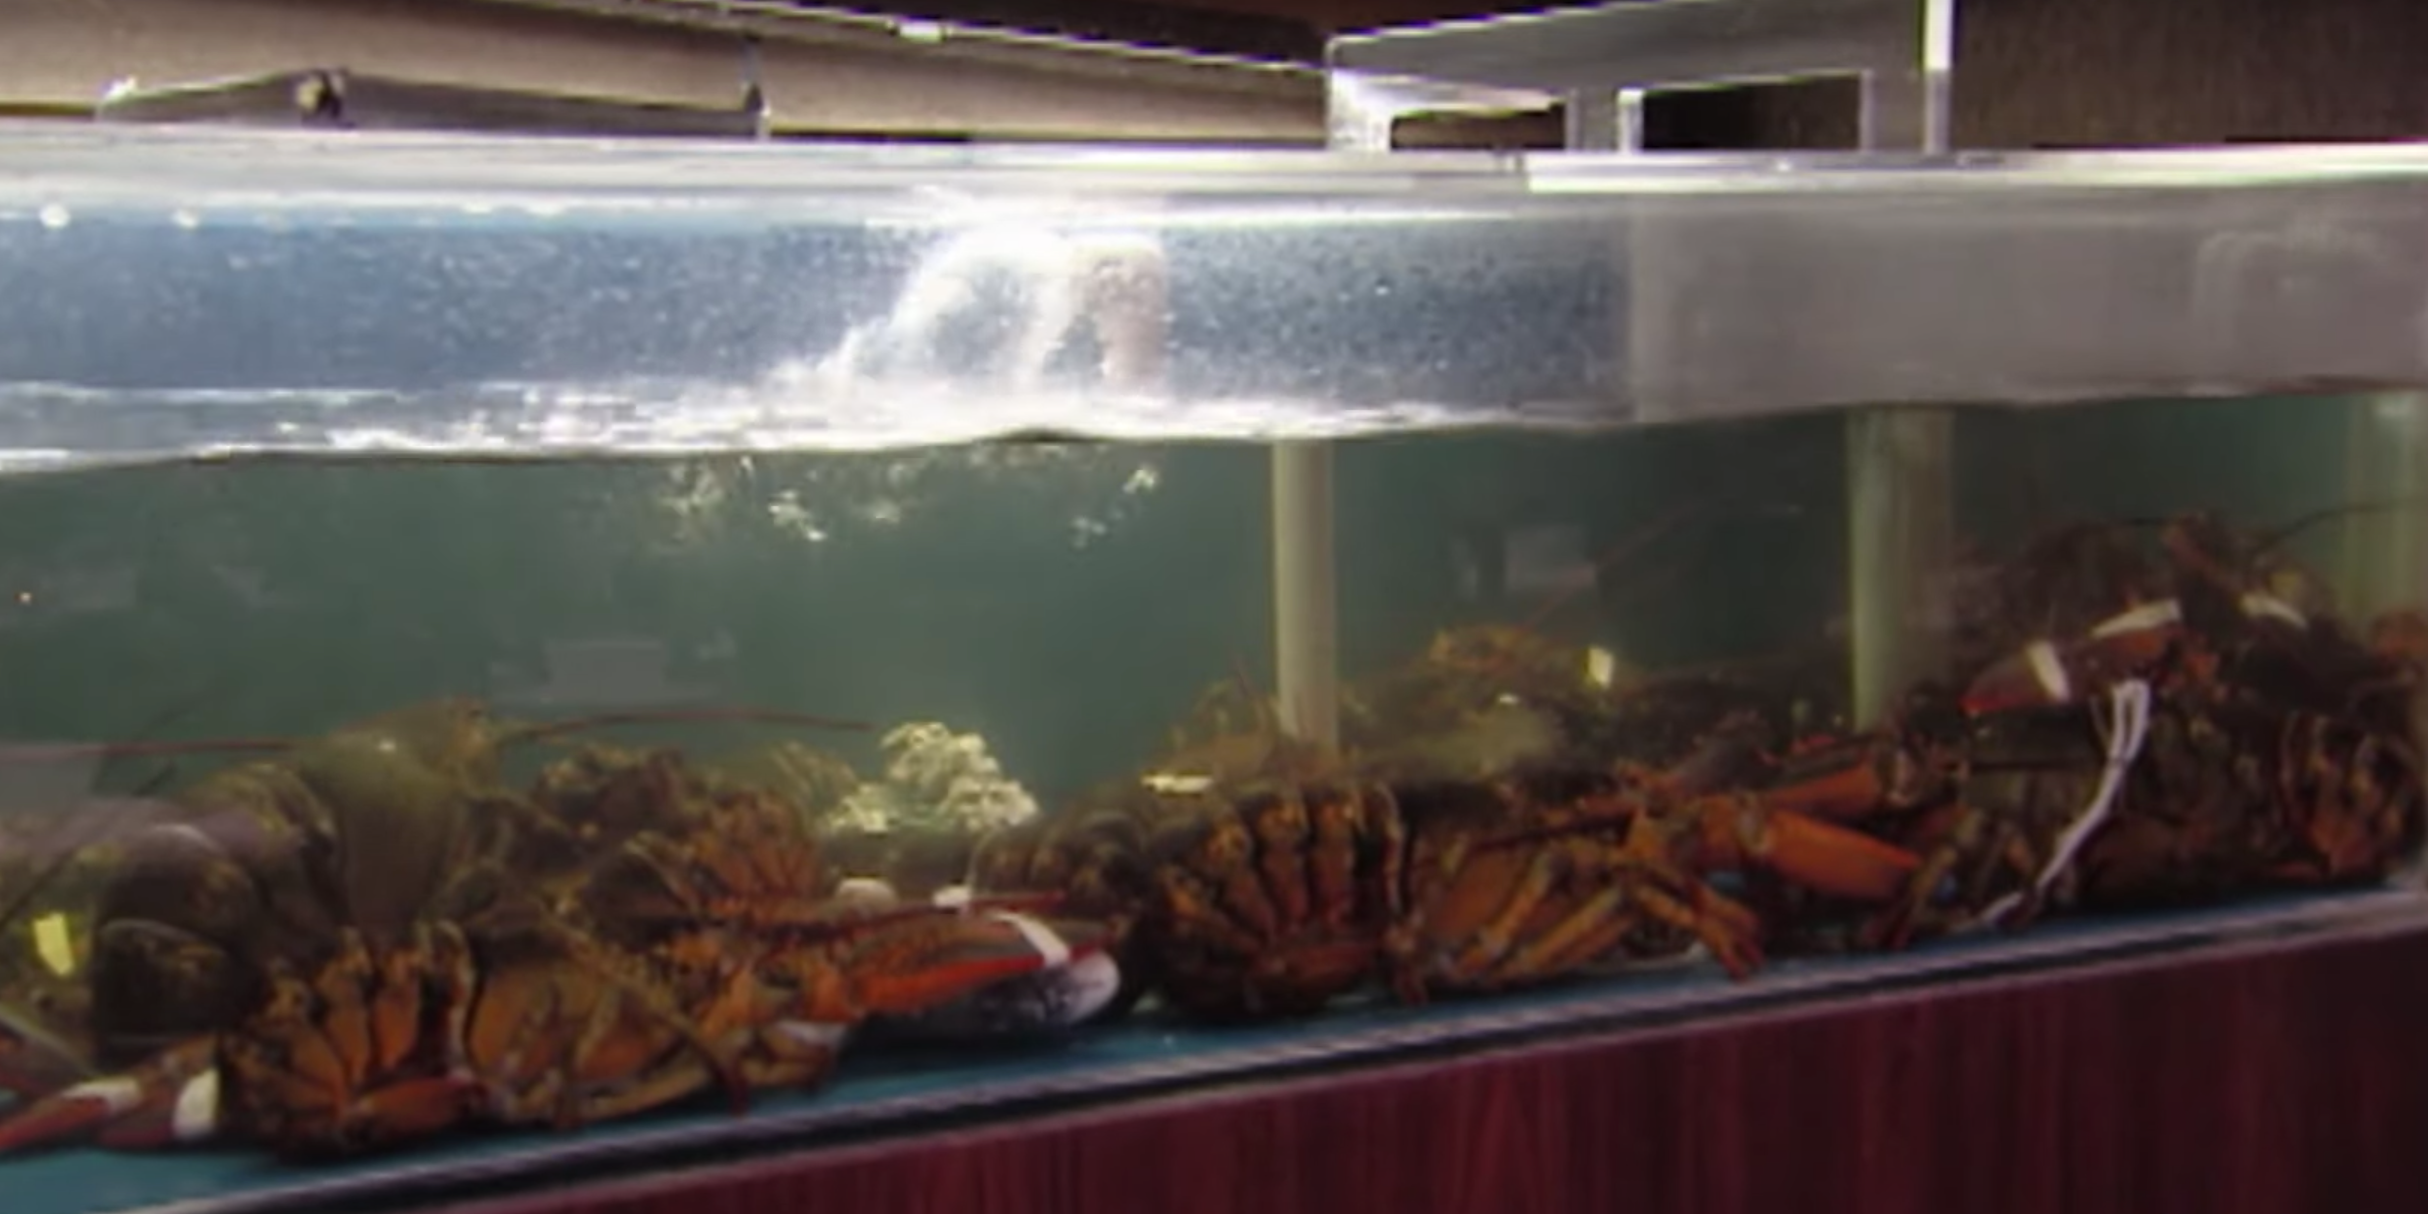 An image of the lobster tank seen in the Spanish Pavilion restaurant.